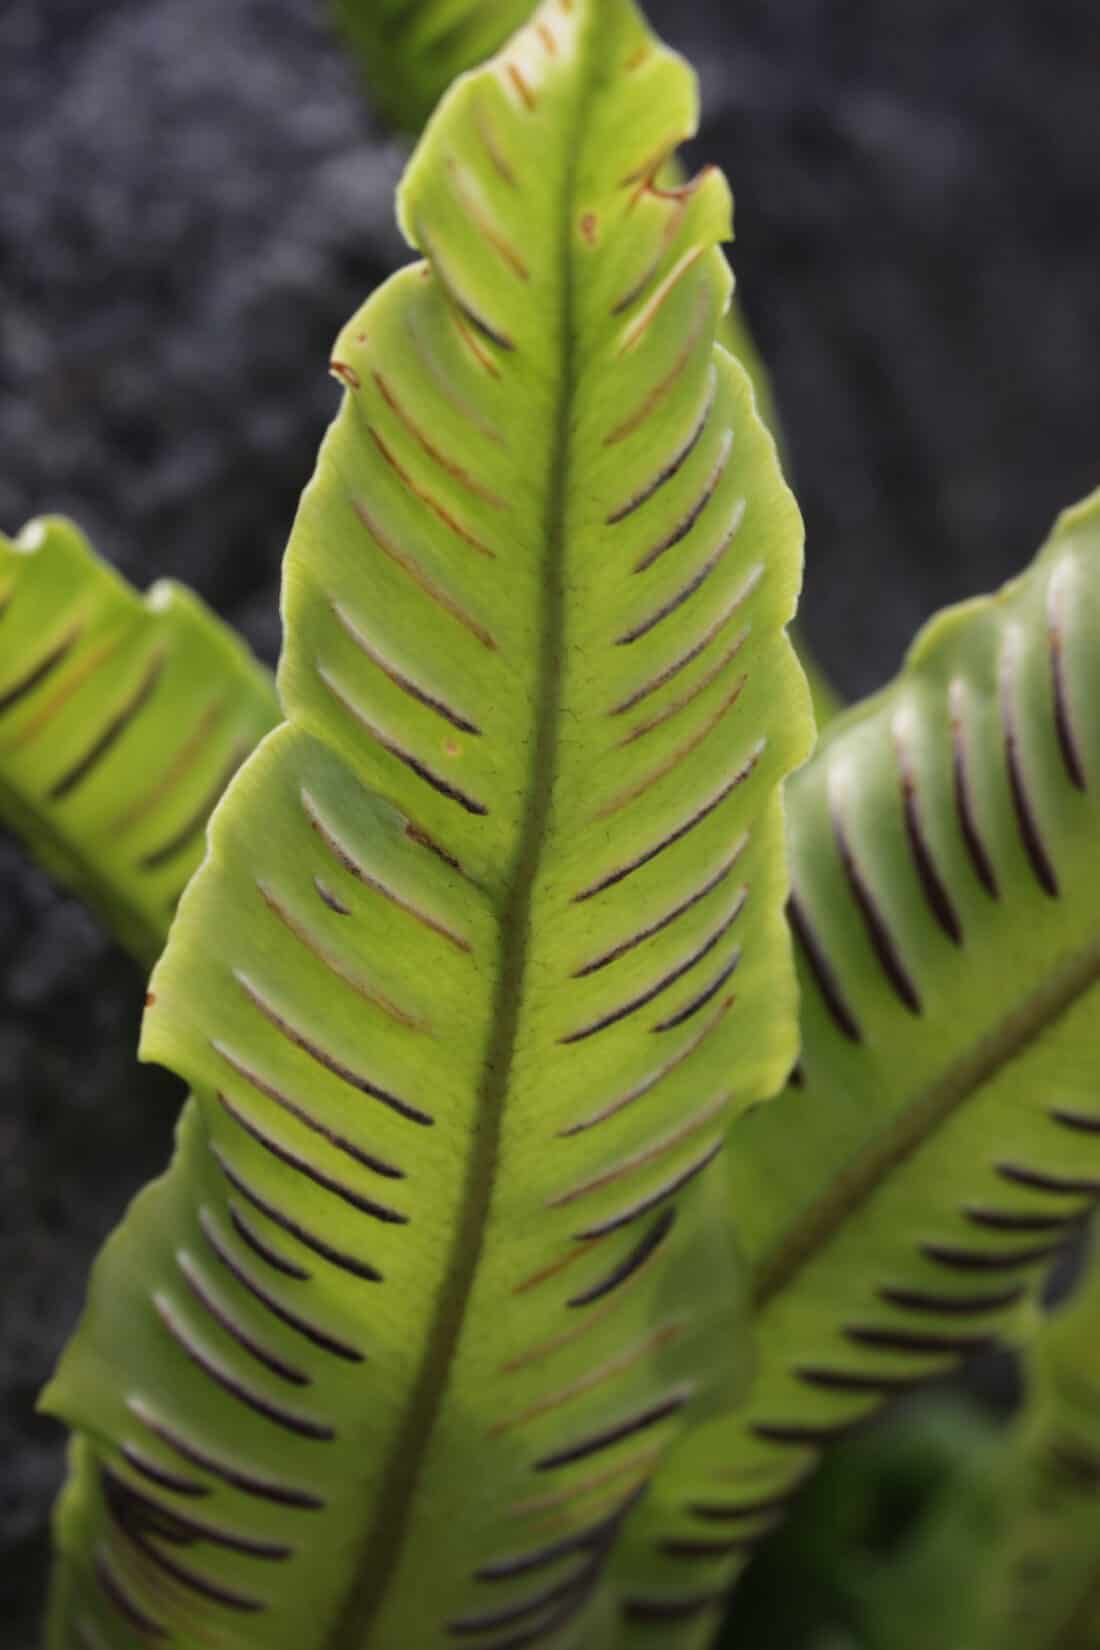 Close-up of a green fern leaf with distinctive spore patterns on the underside. asplenium scolopendrium - hart's tongue fern